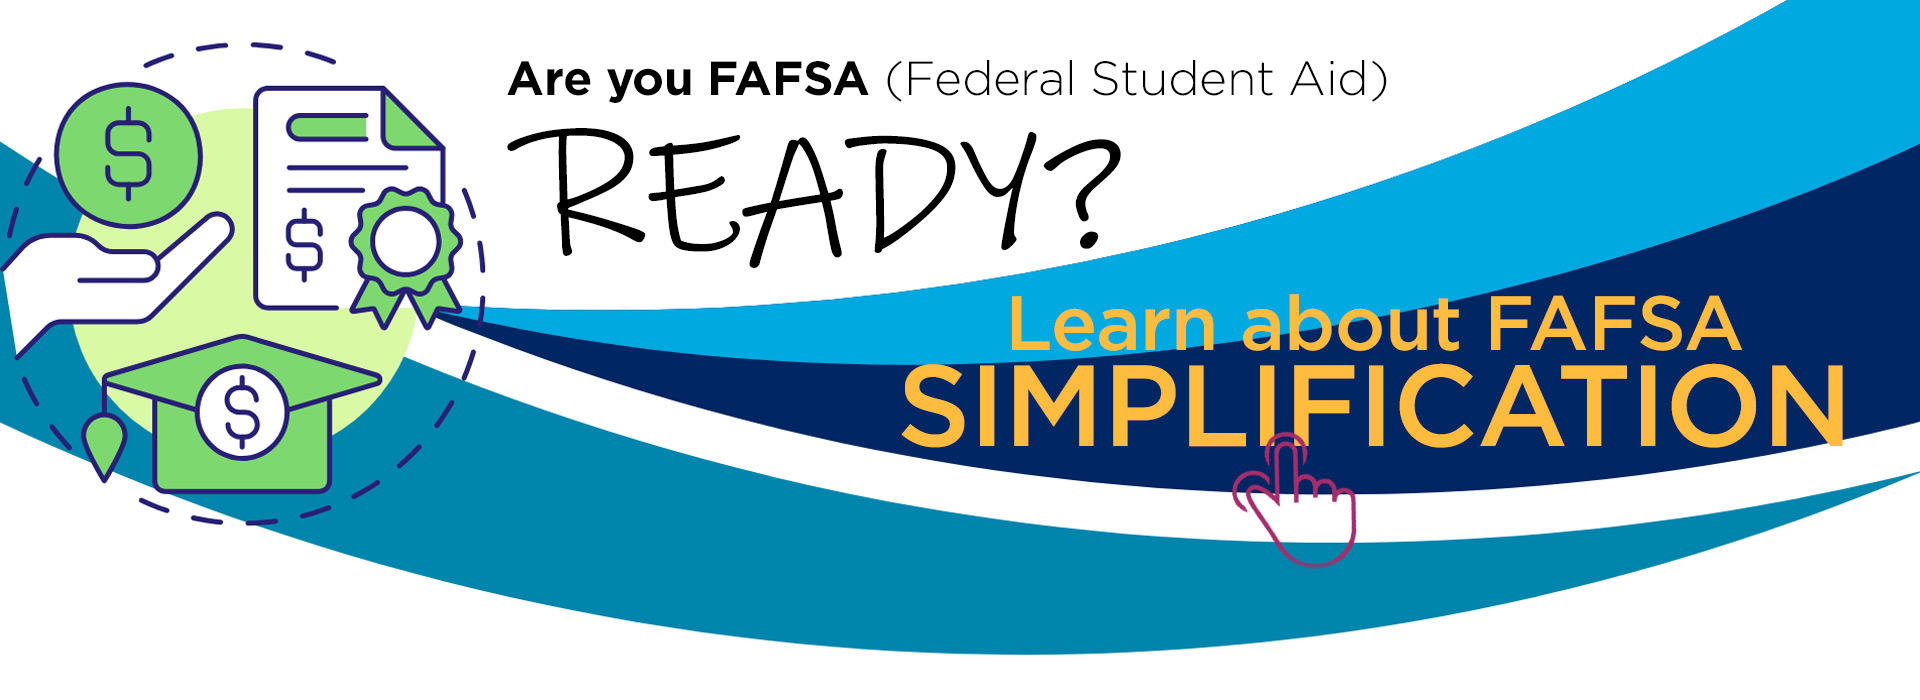 Federal Student Aid FAFSA learn about FAFSA Simplification